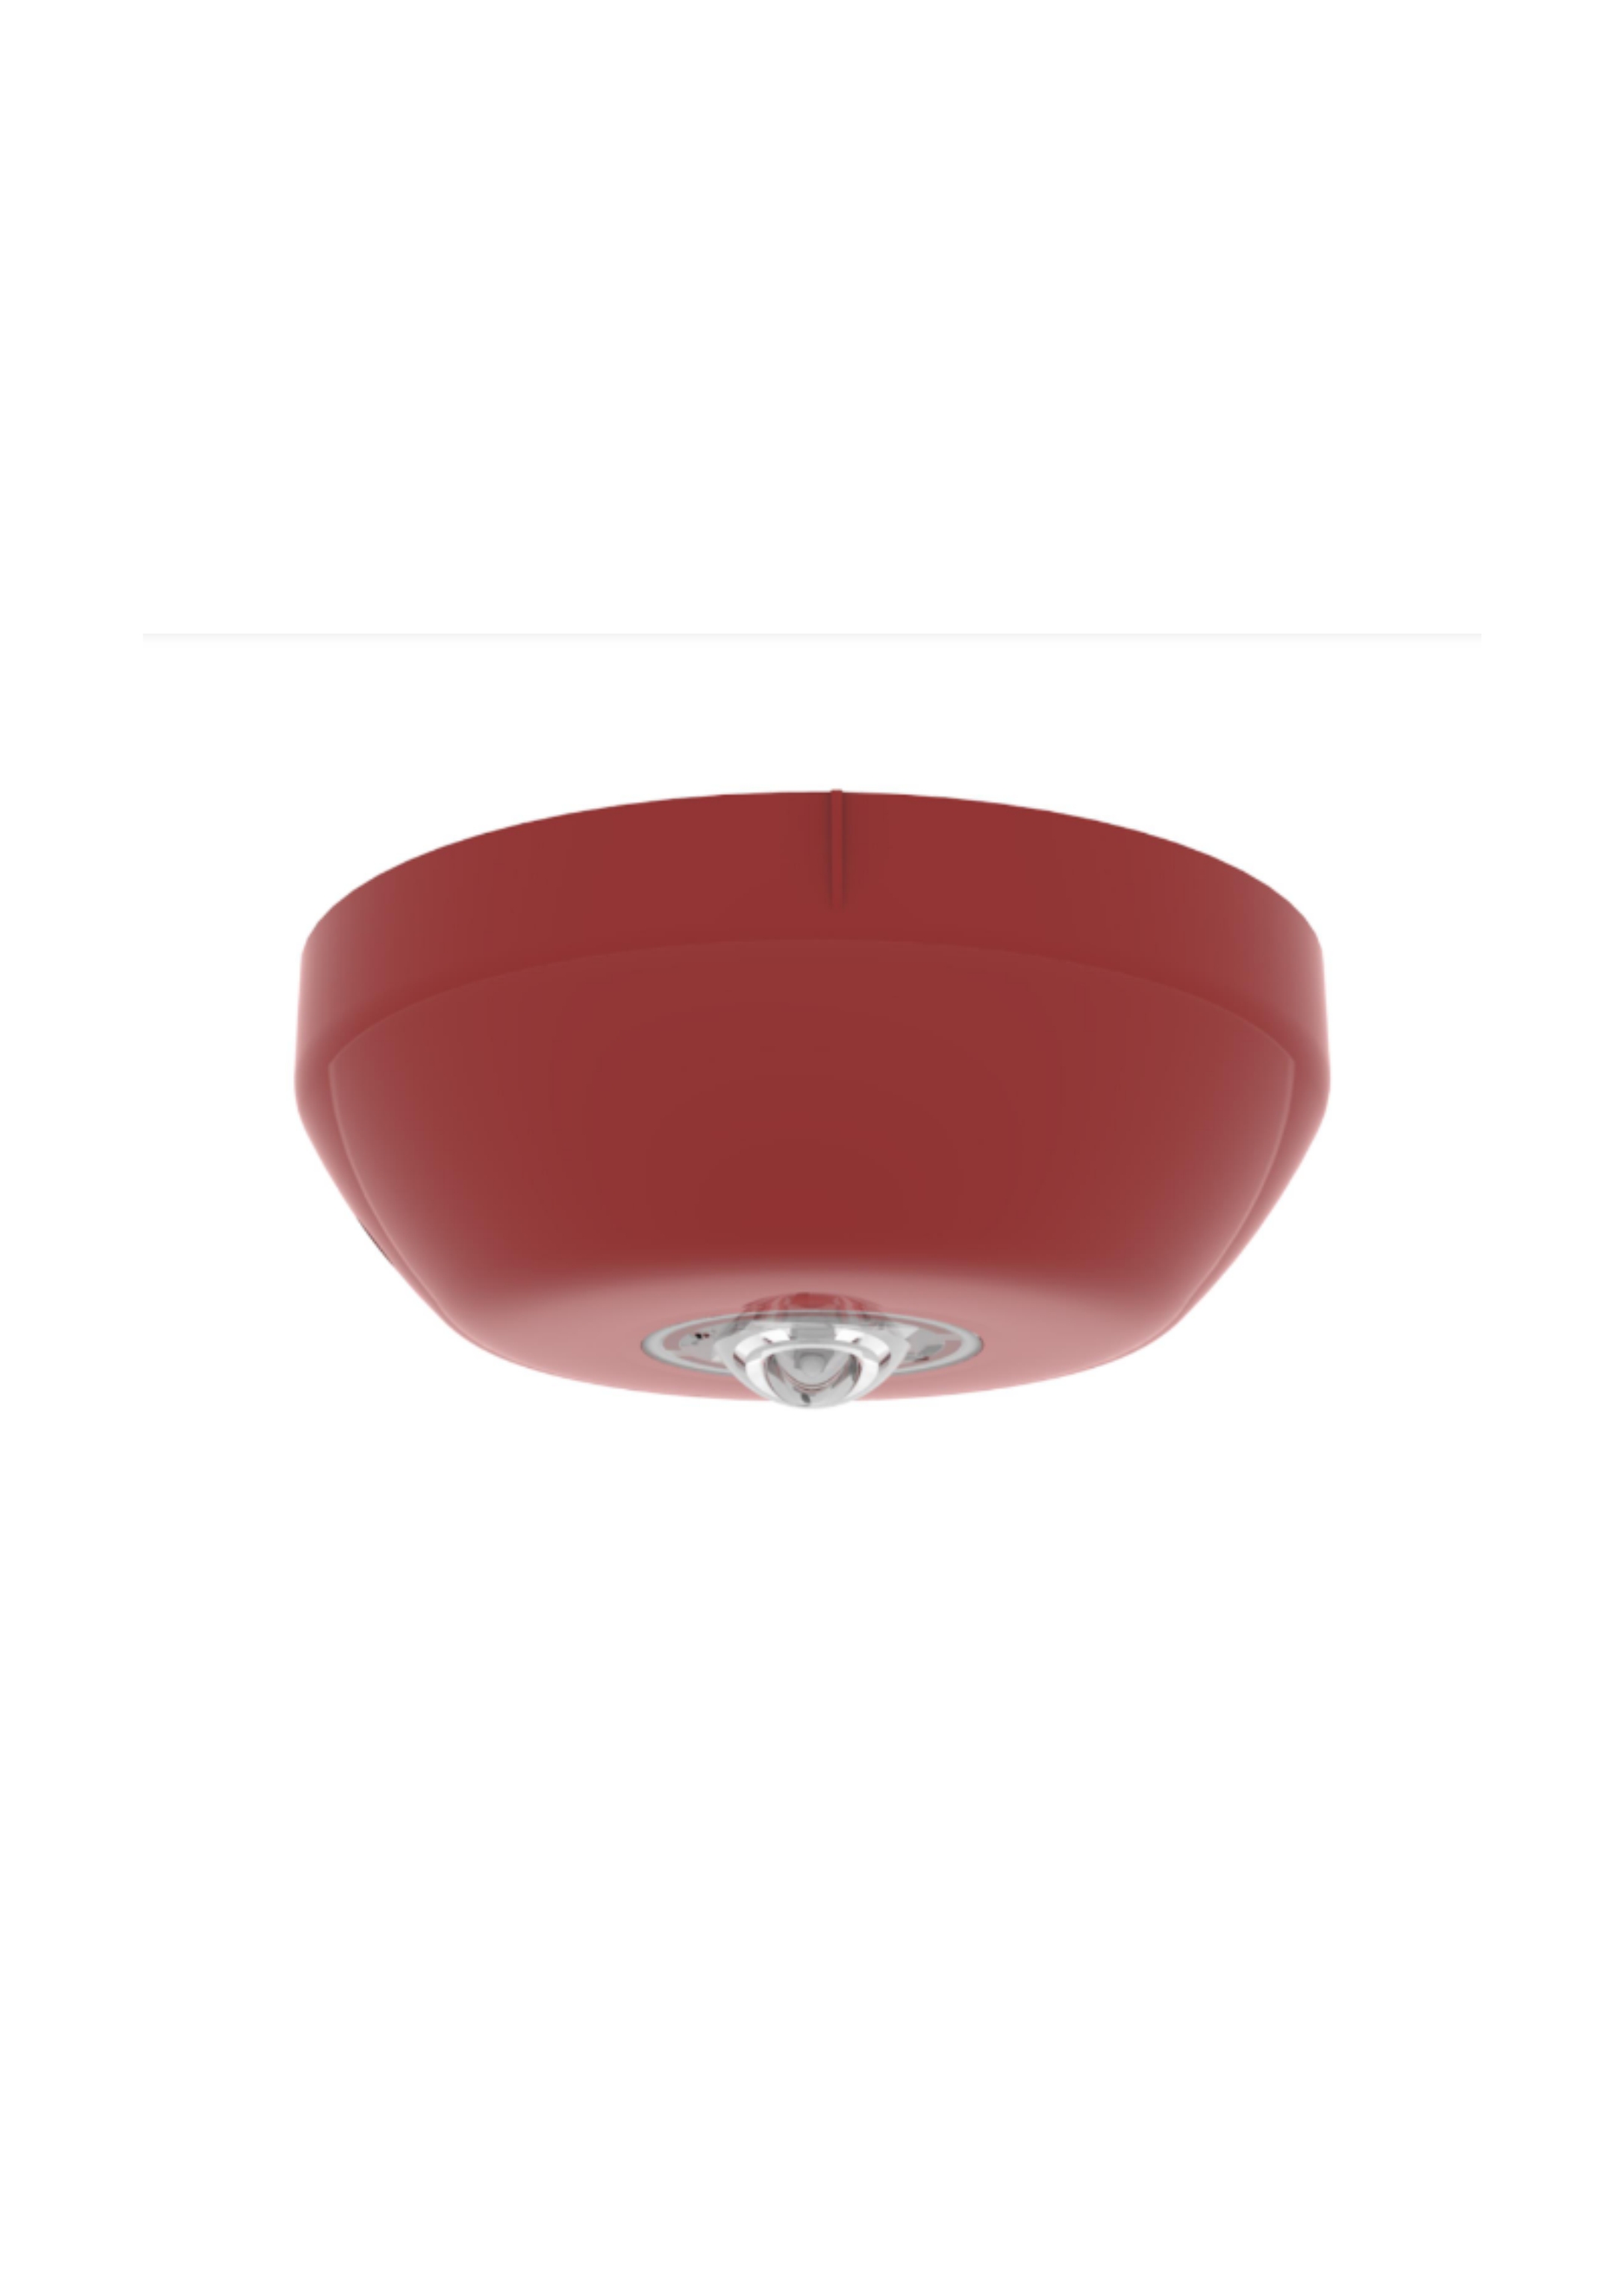 Ceiling Beacon - Red case, red LEDs (7.5m) 1460250...